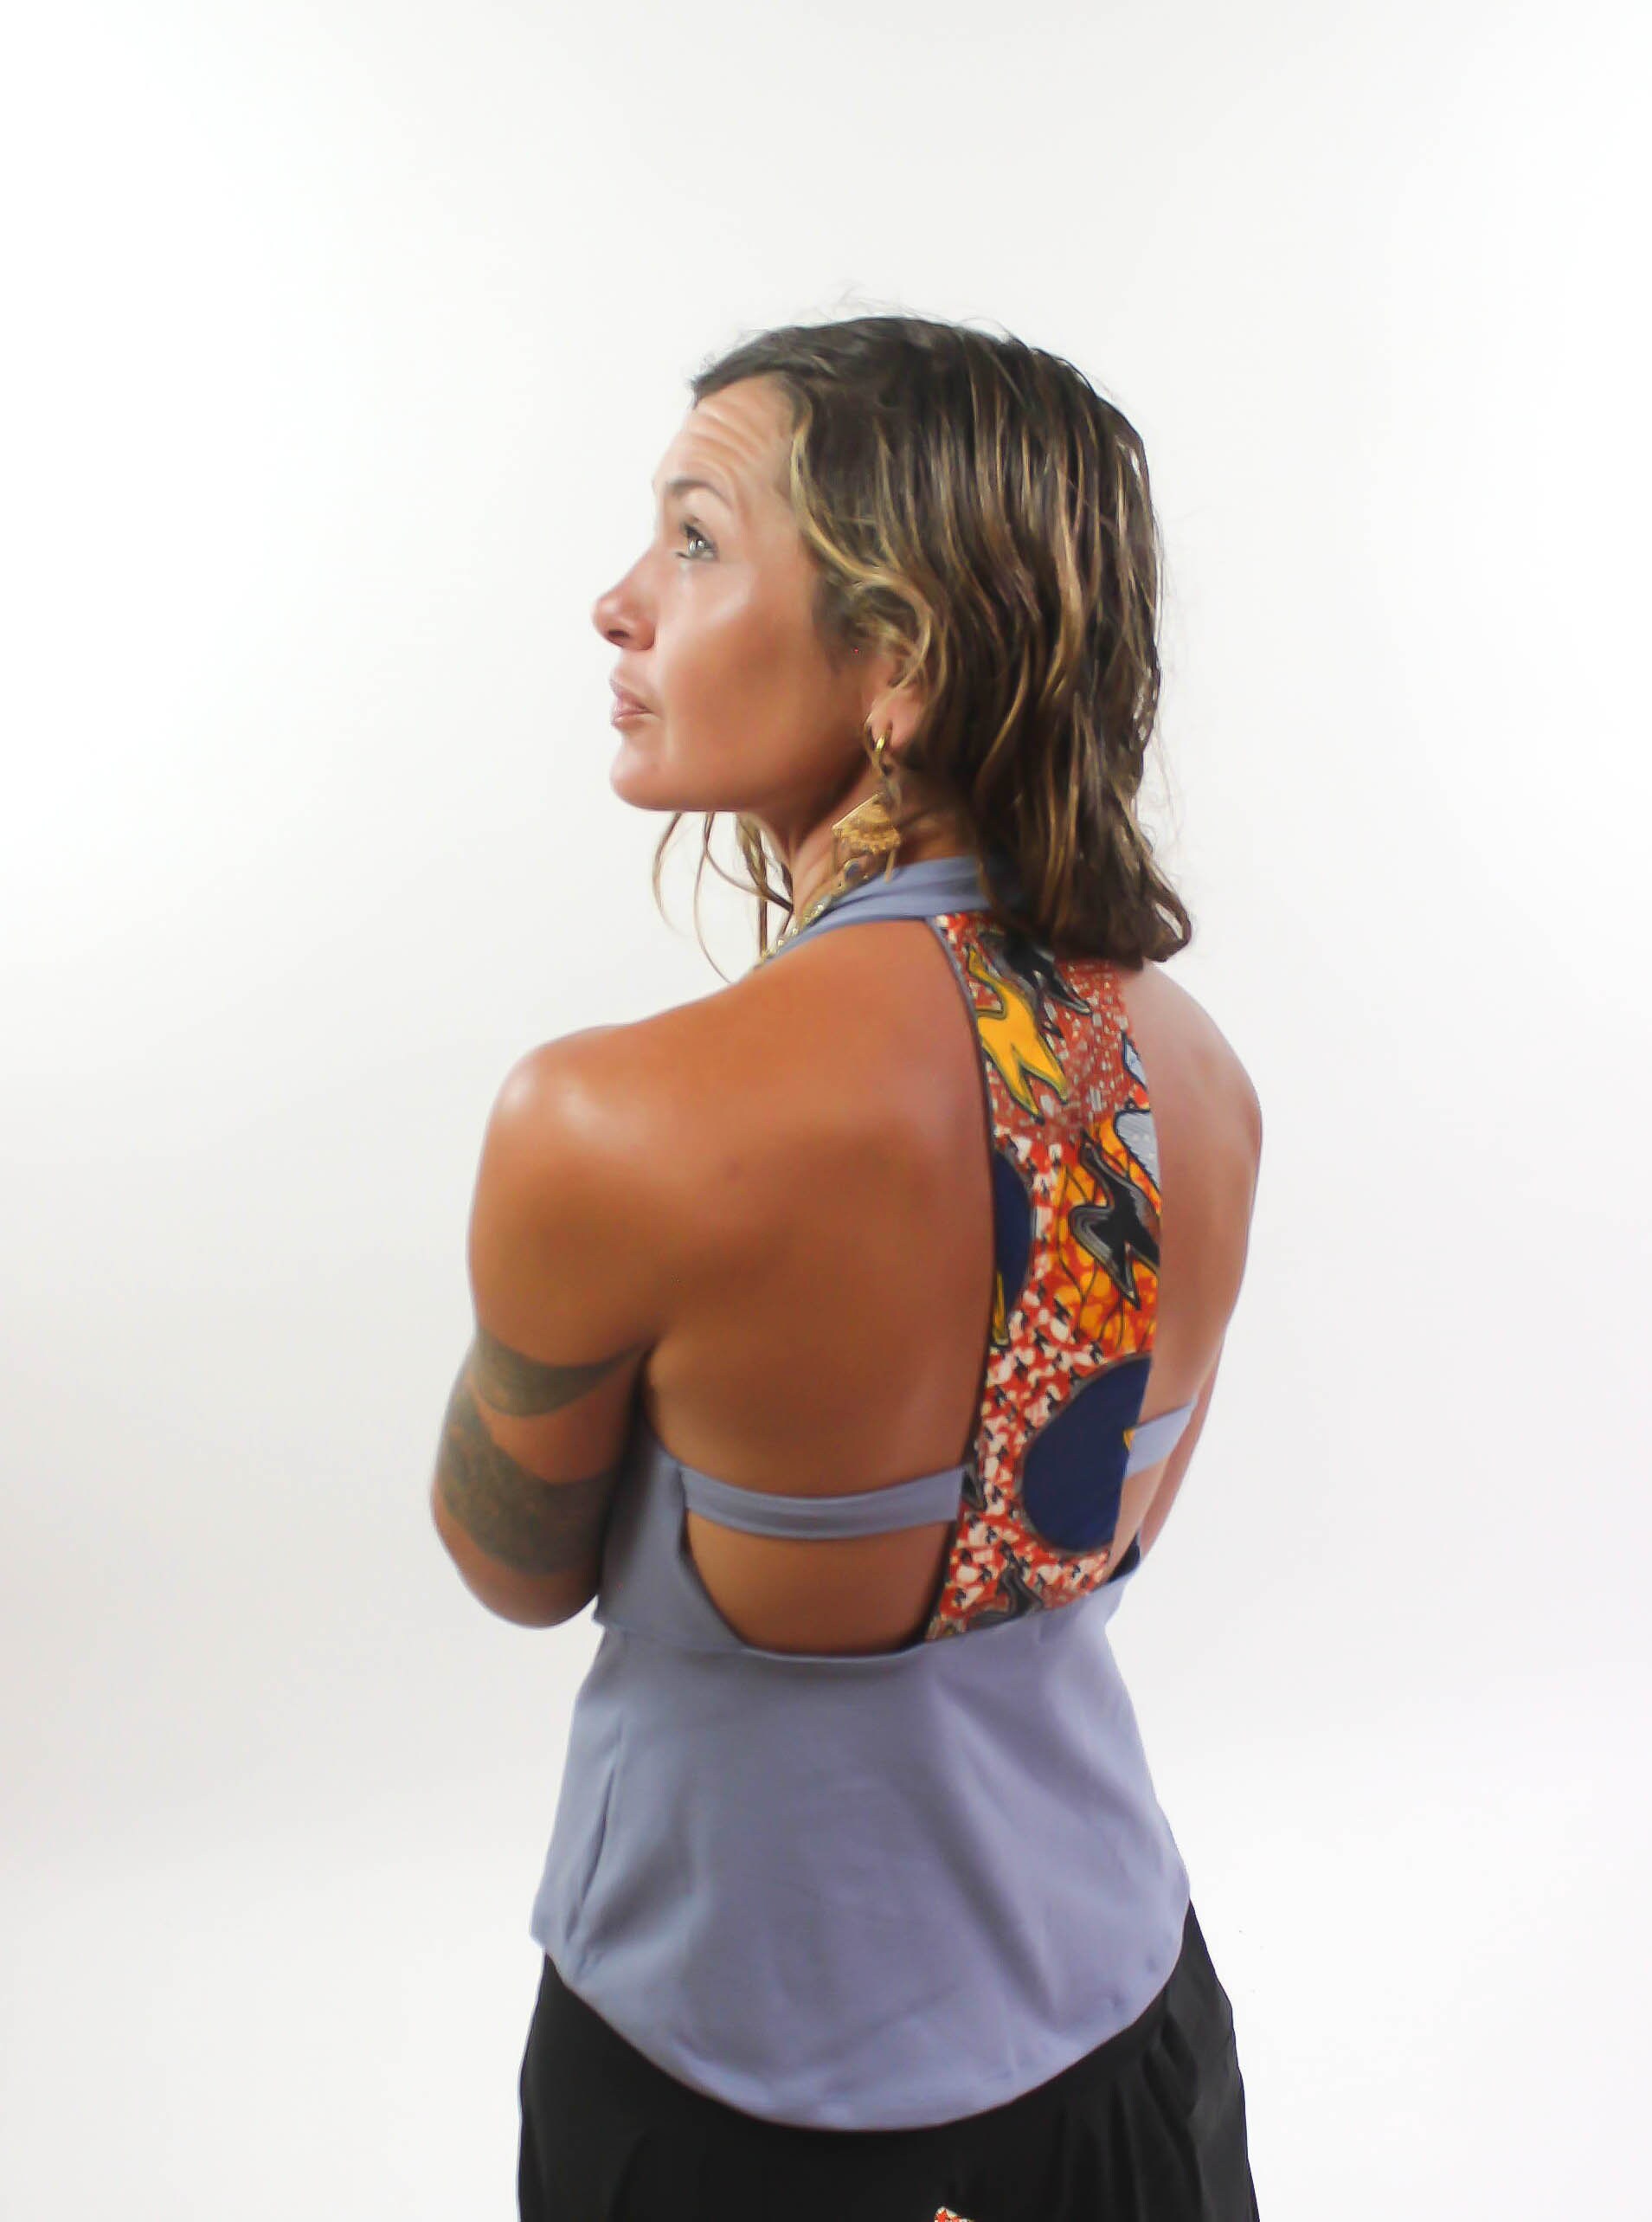 Halter Top Light Blue Backless Shirt With African Print Fabric